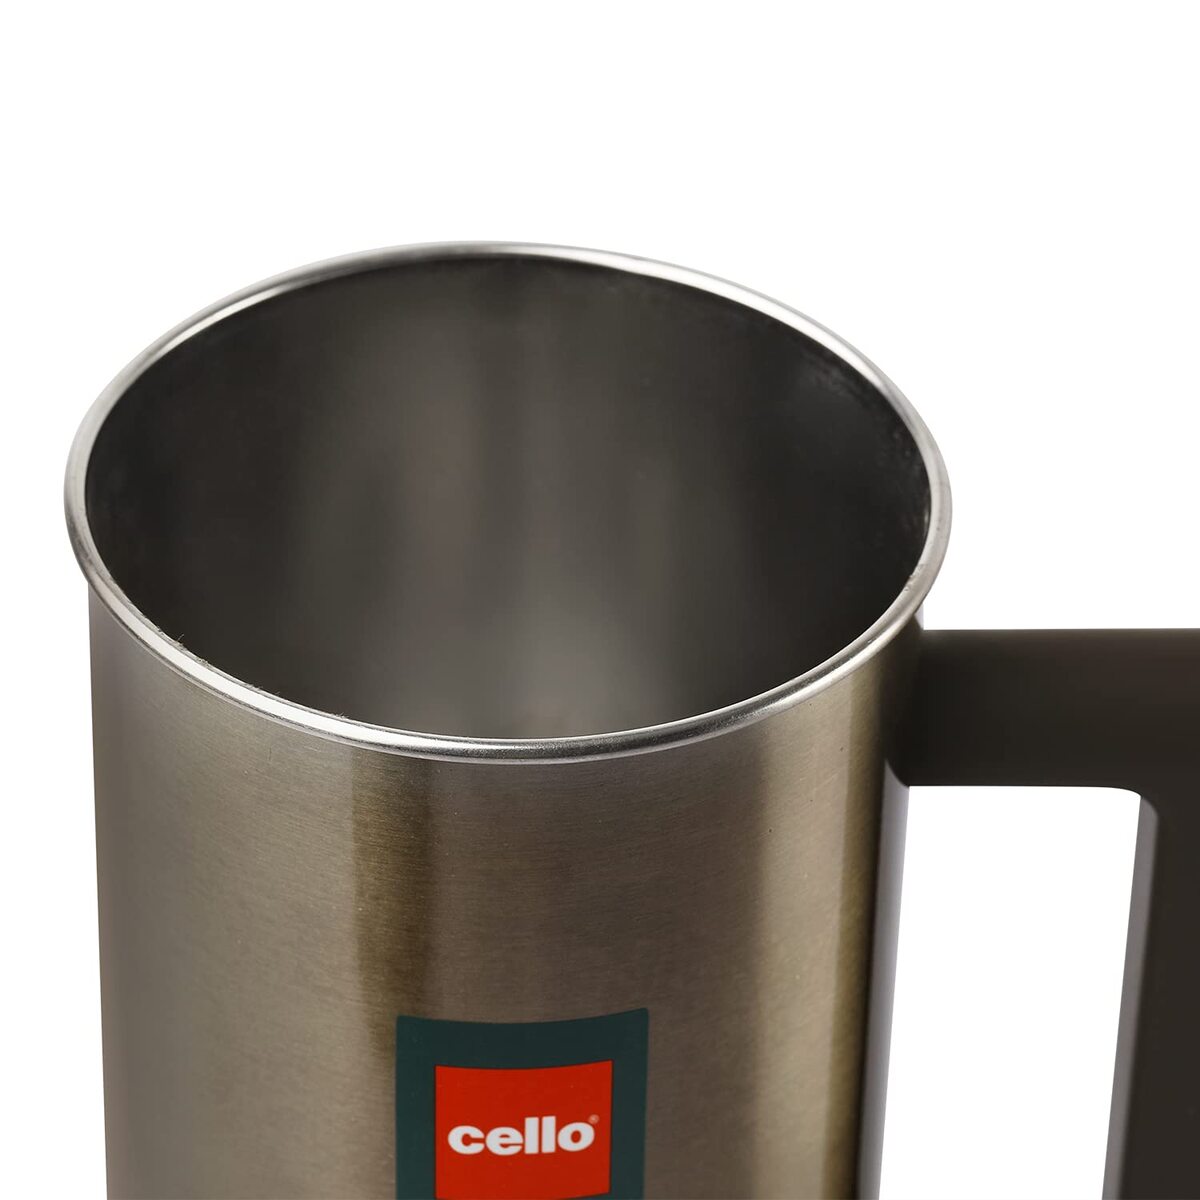 Cello Stainless Steel Belleza Steel Jug 1.6L Assorted Colour